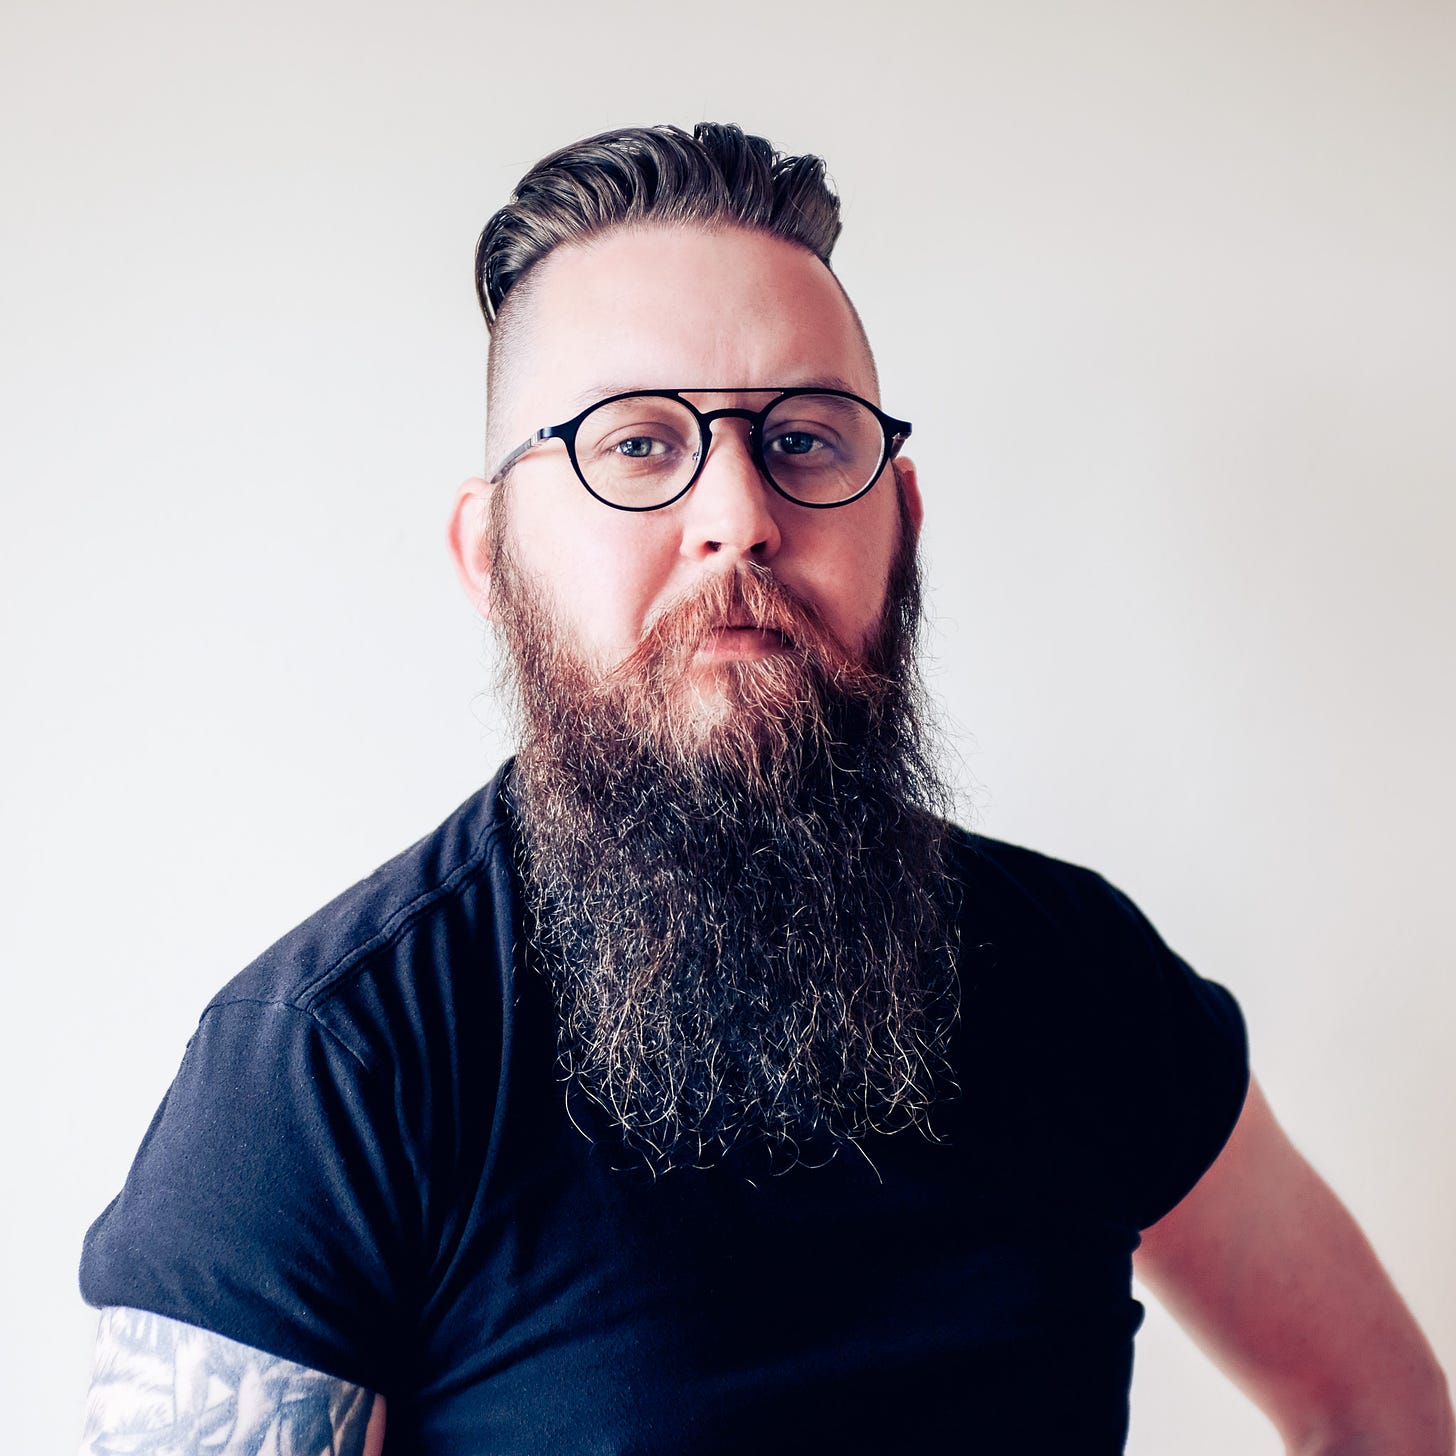 Portrait of John Wayne Hill, a San Francisco based Product Designer with a beard and glasses